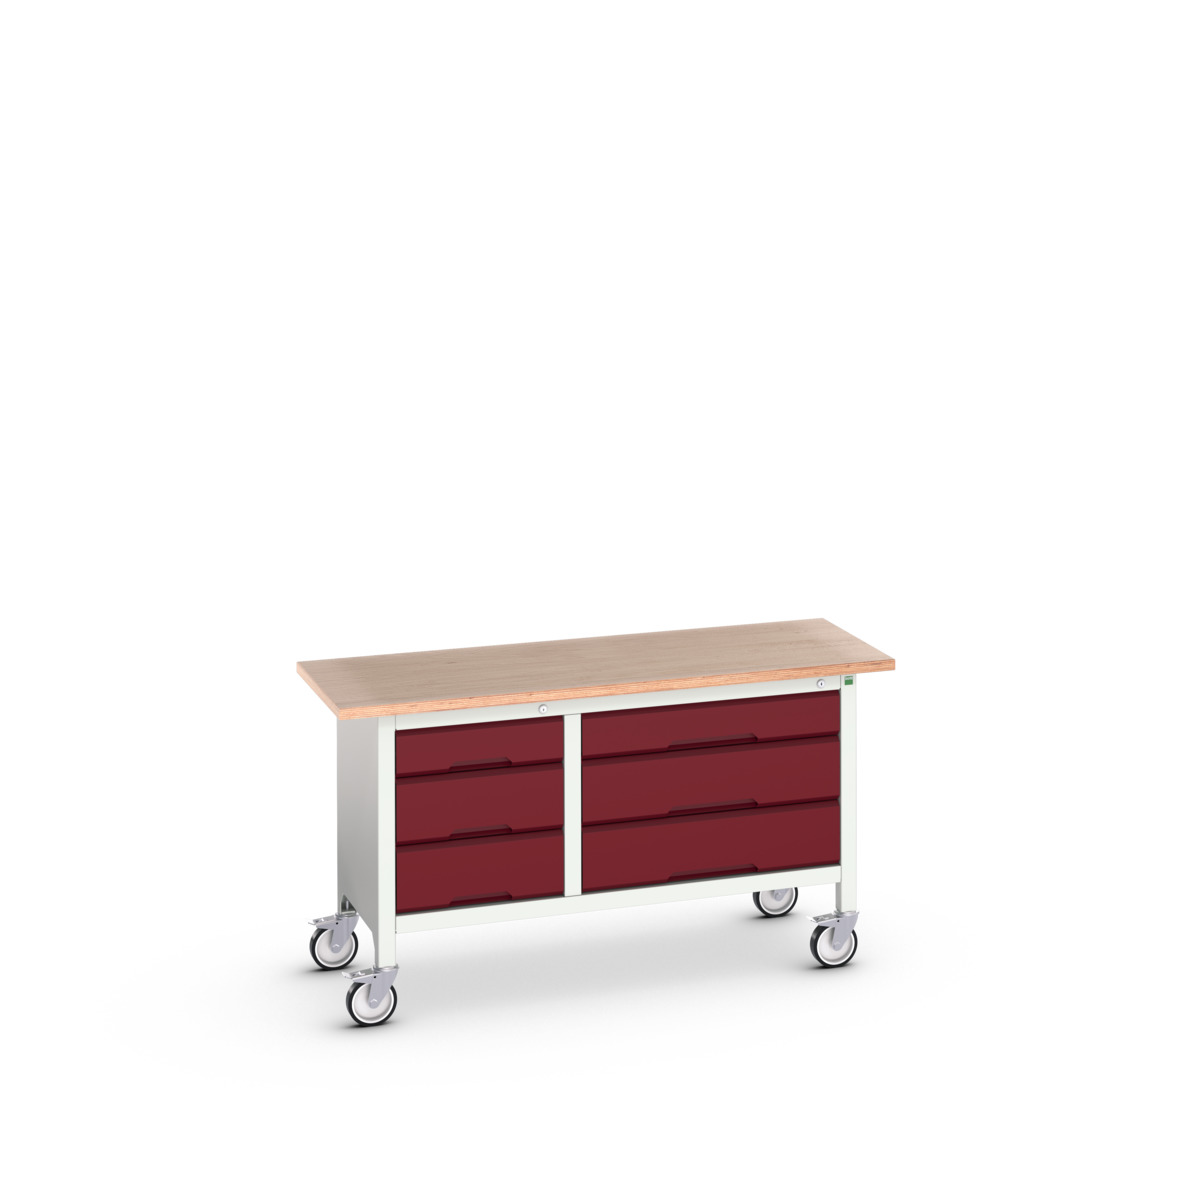 16923215.24 - verso mobile storage bench (mpx)